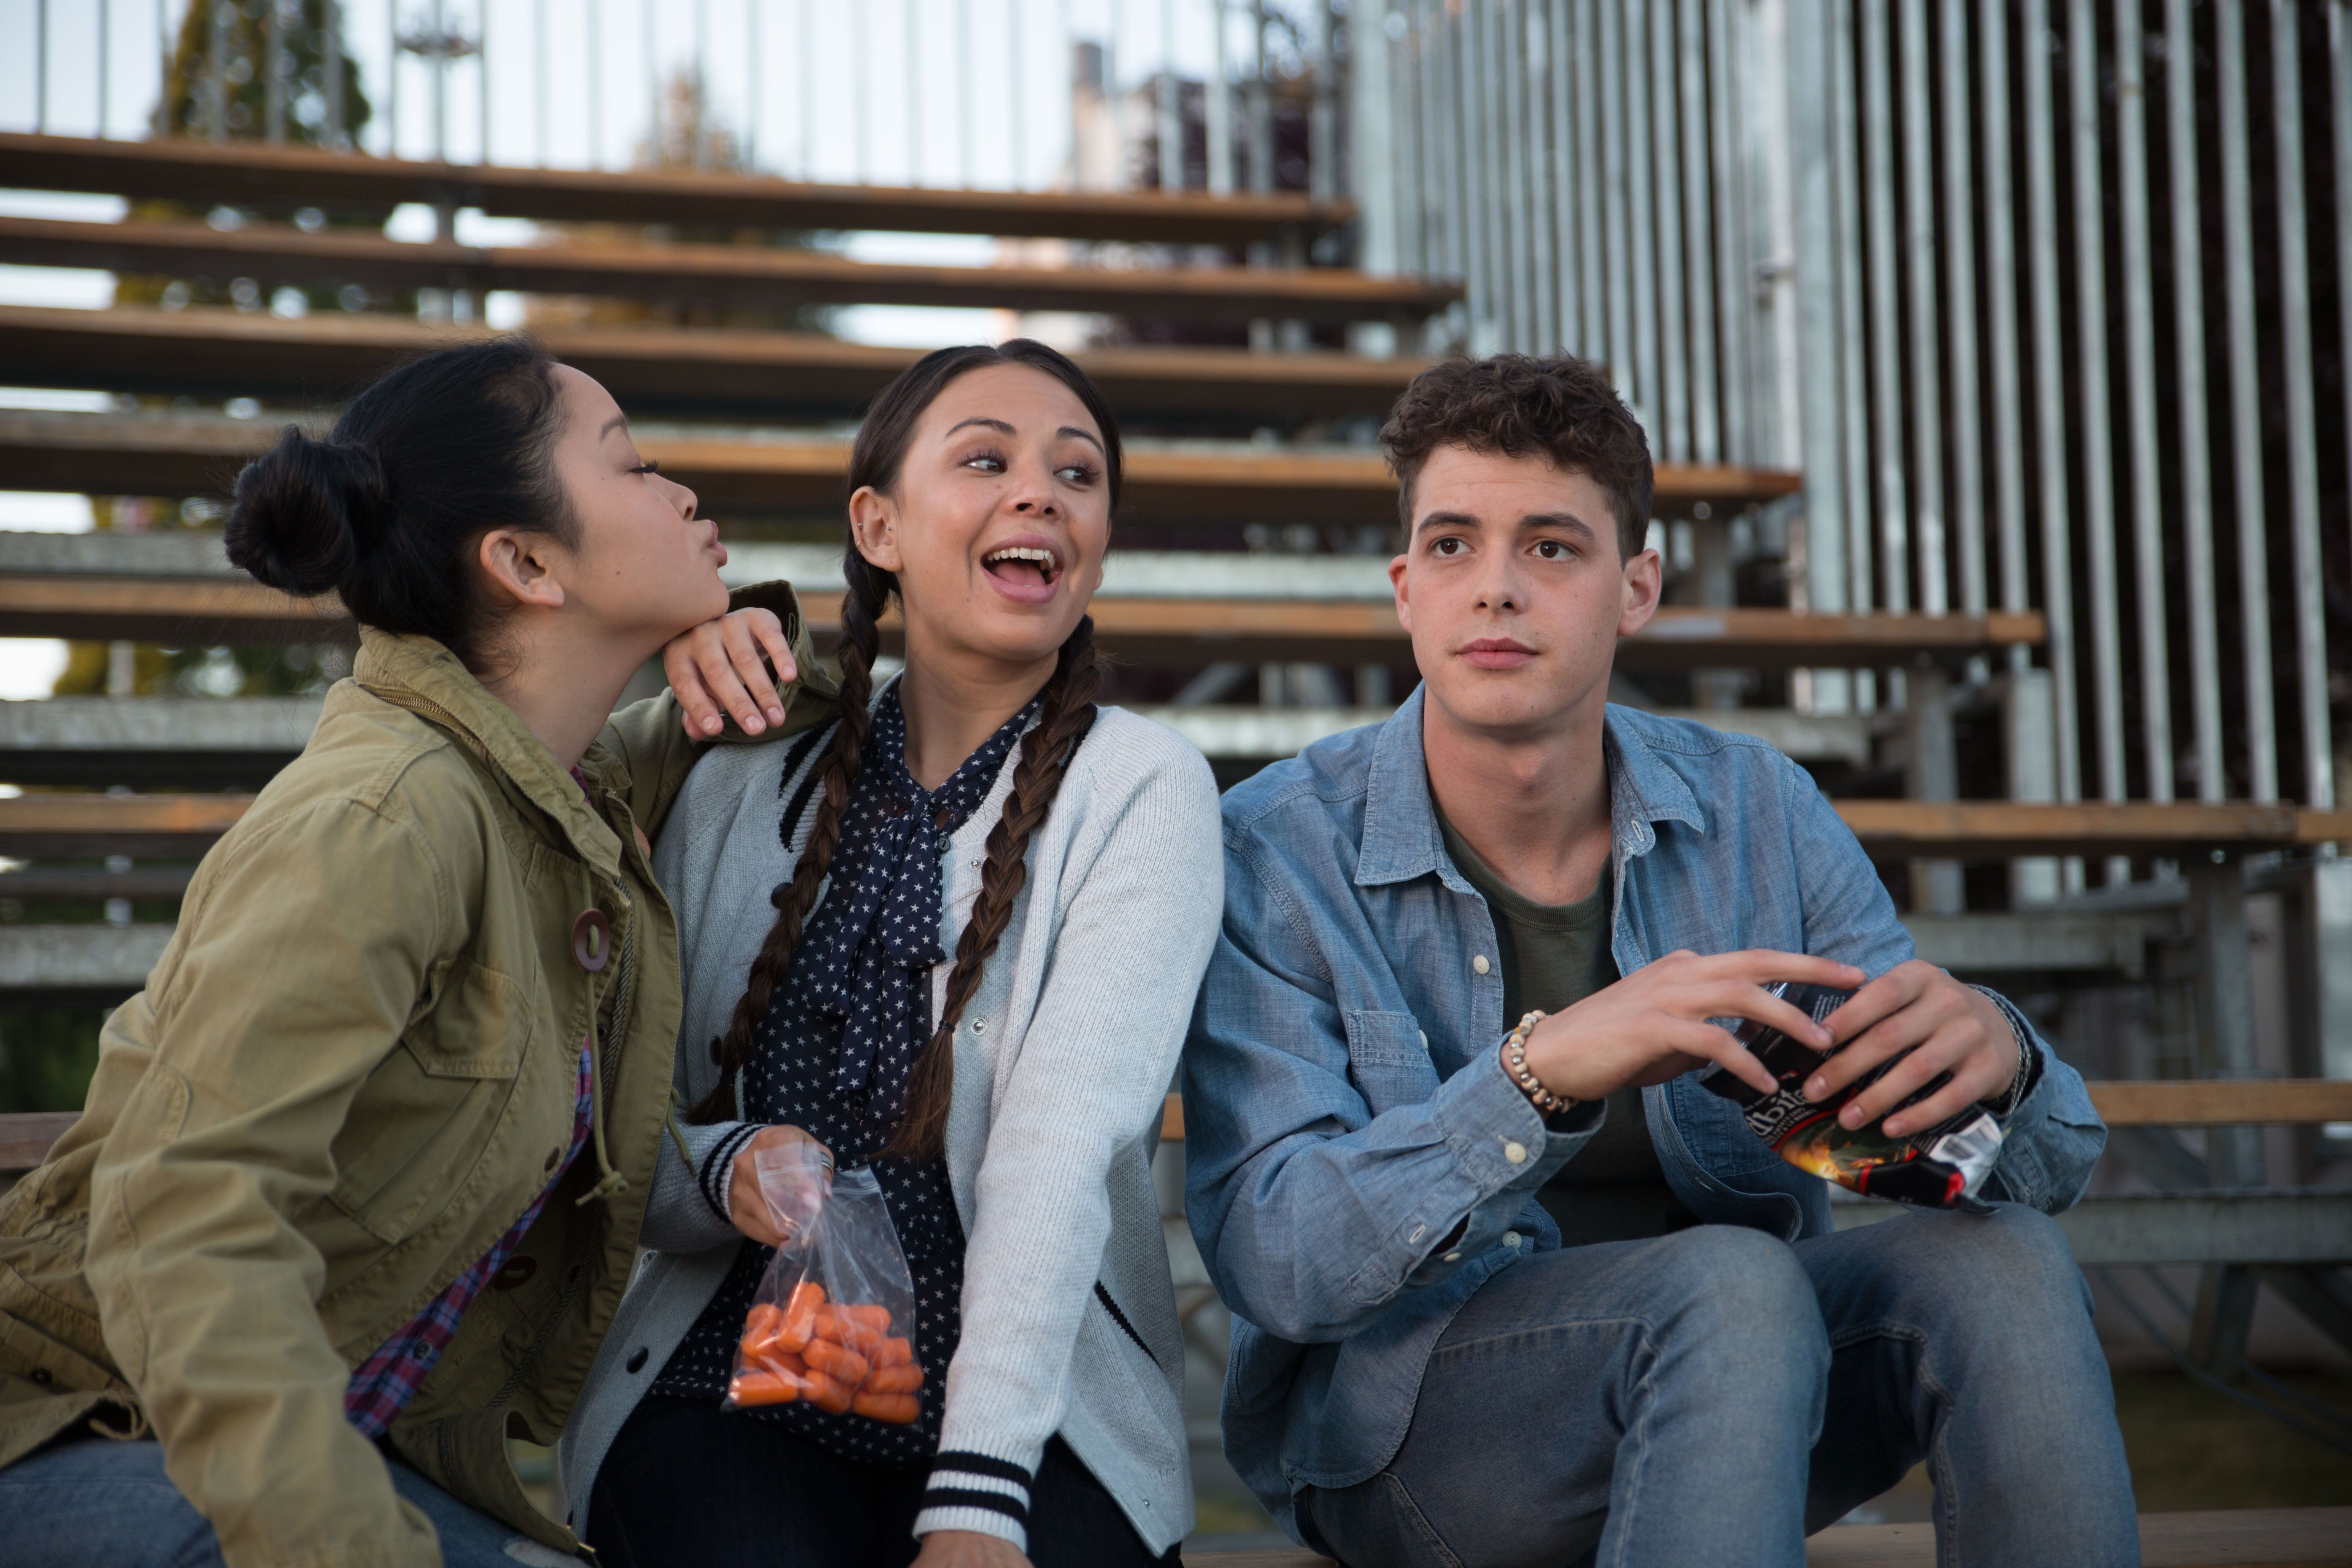 To All the Boys I've Loved Before Actor Israel Broussard Releases Statement About Racist Tweets